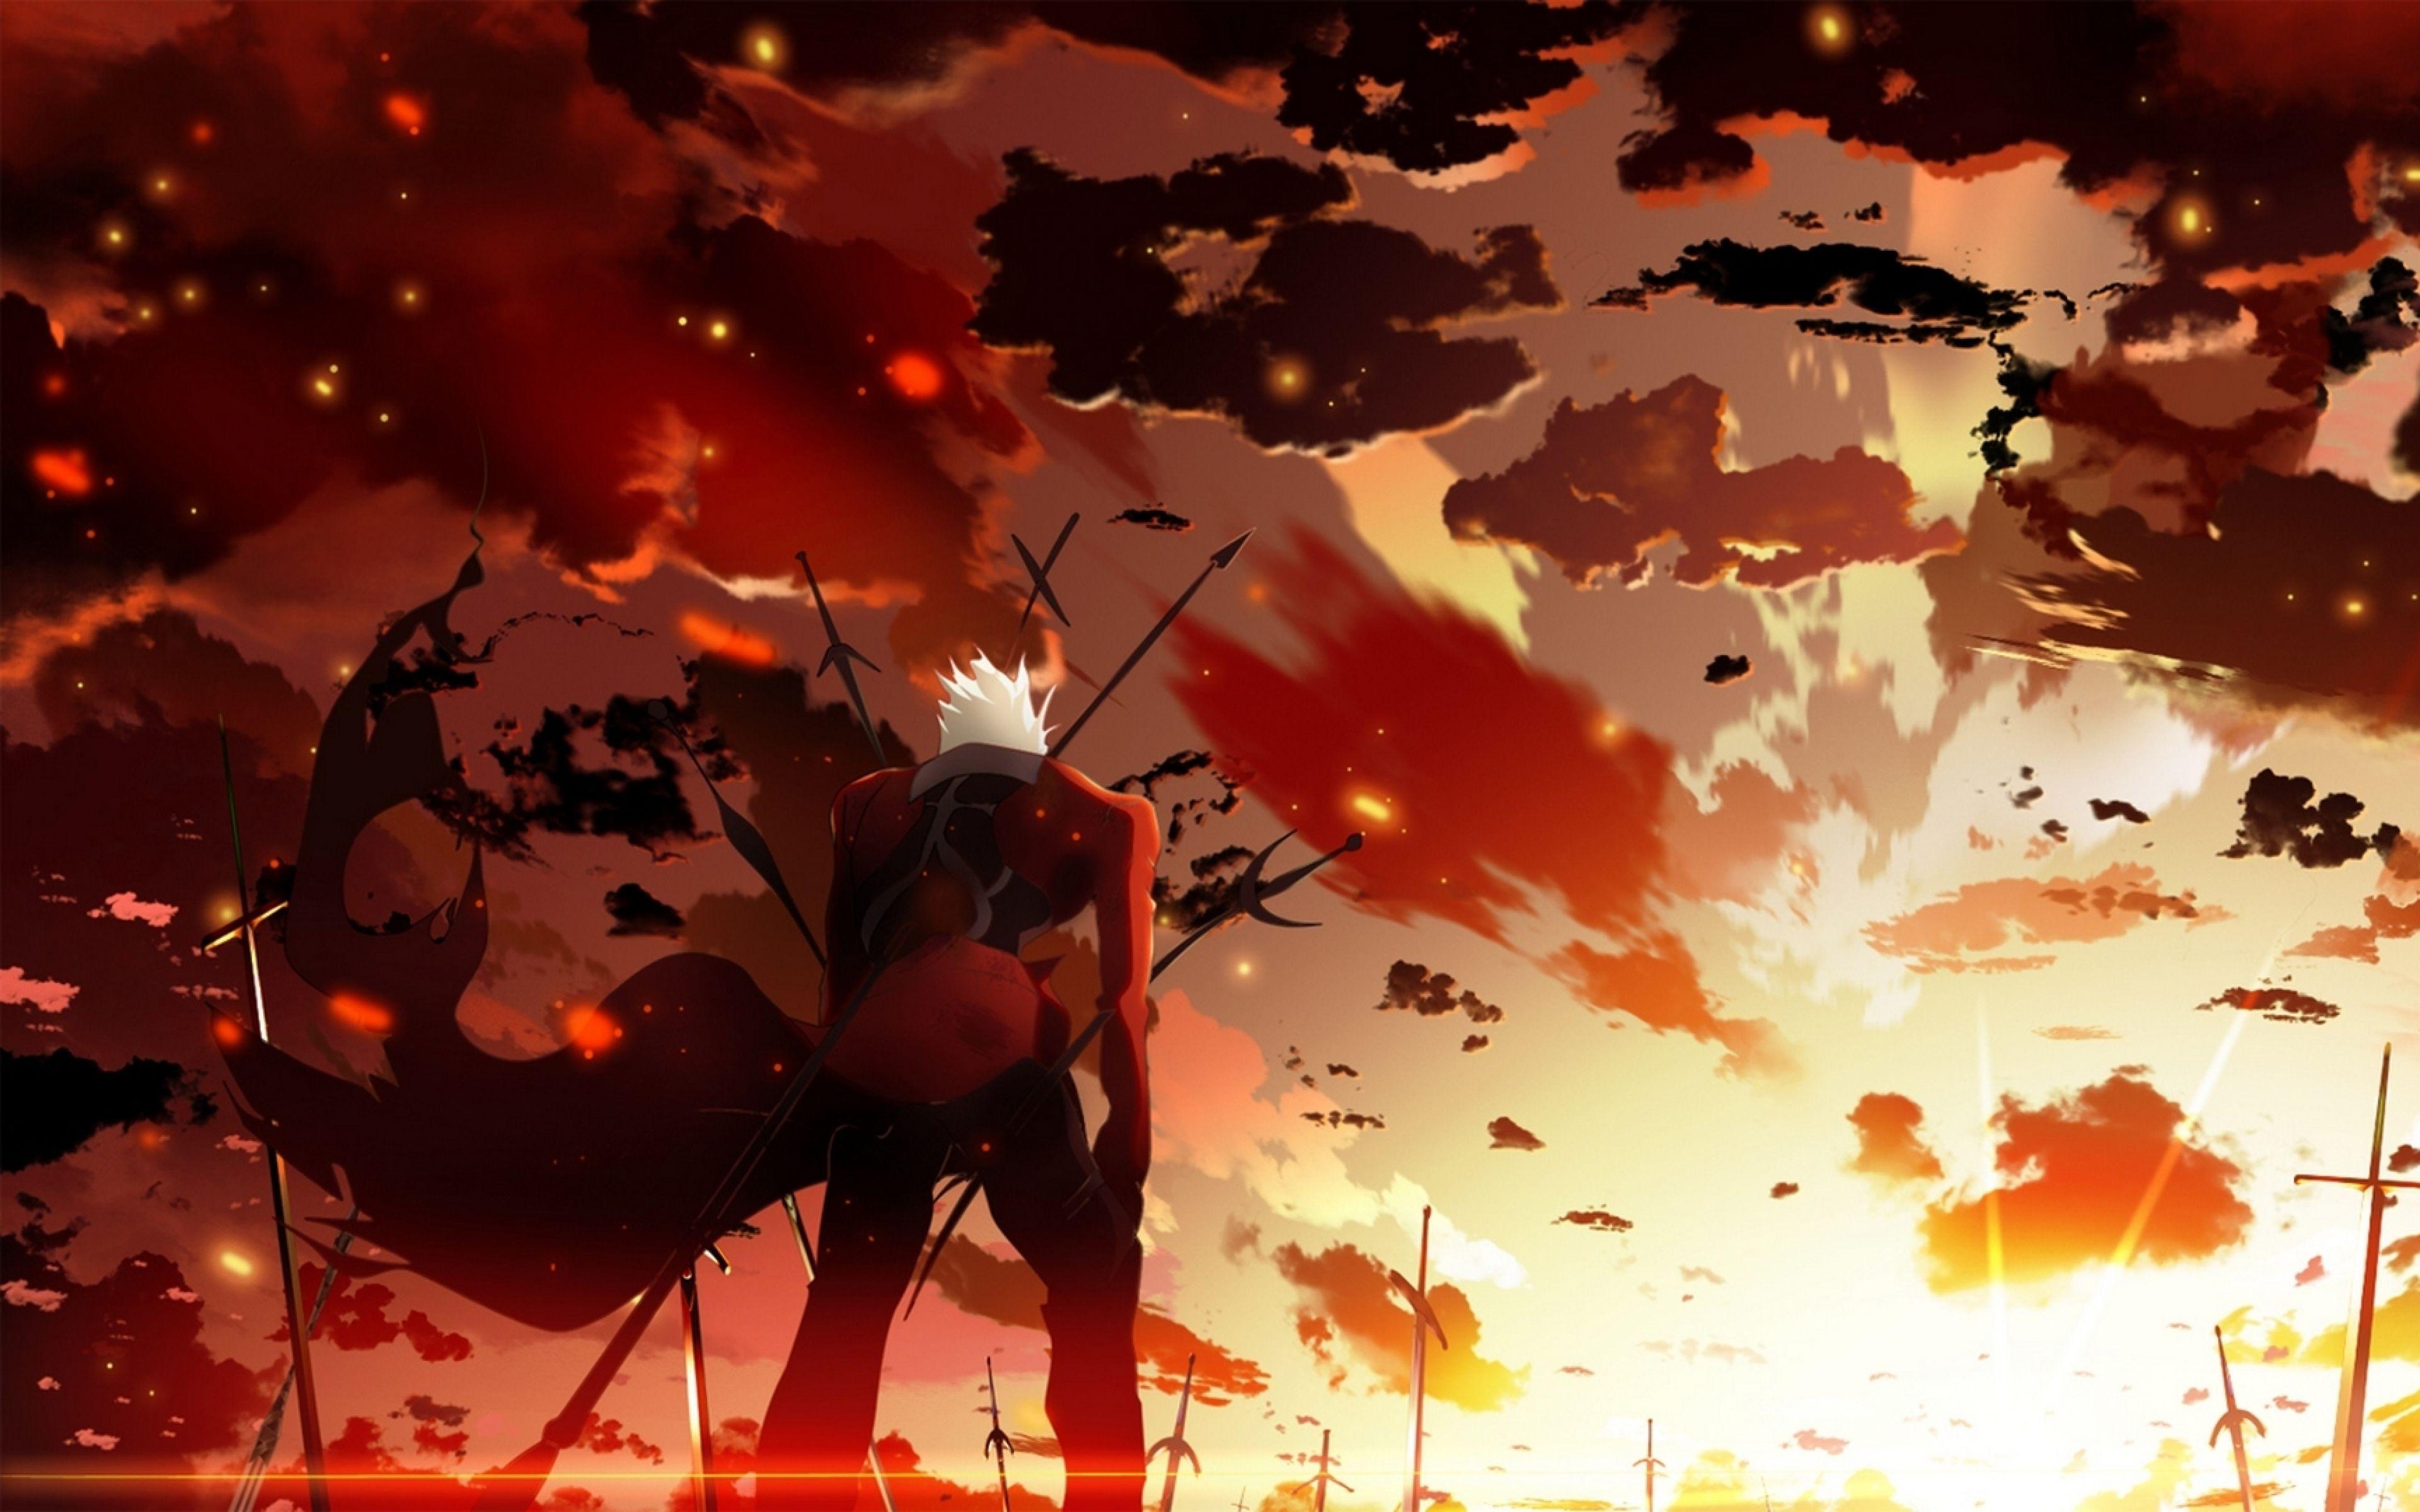 Download Wallpaper 3840x2400 Fate stay night, Archer, Sunset, Man